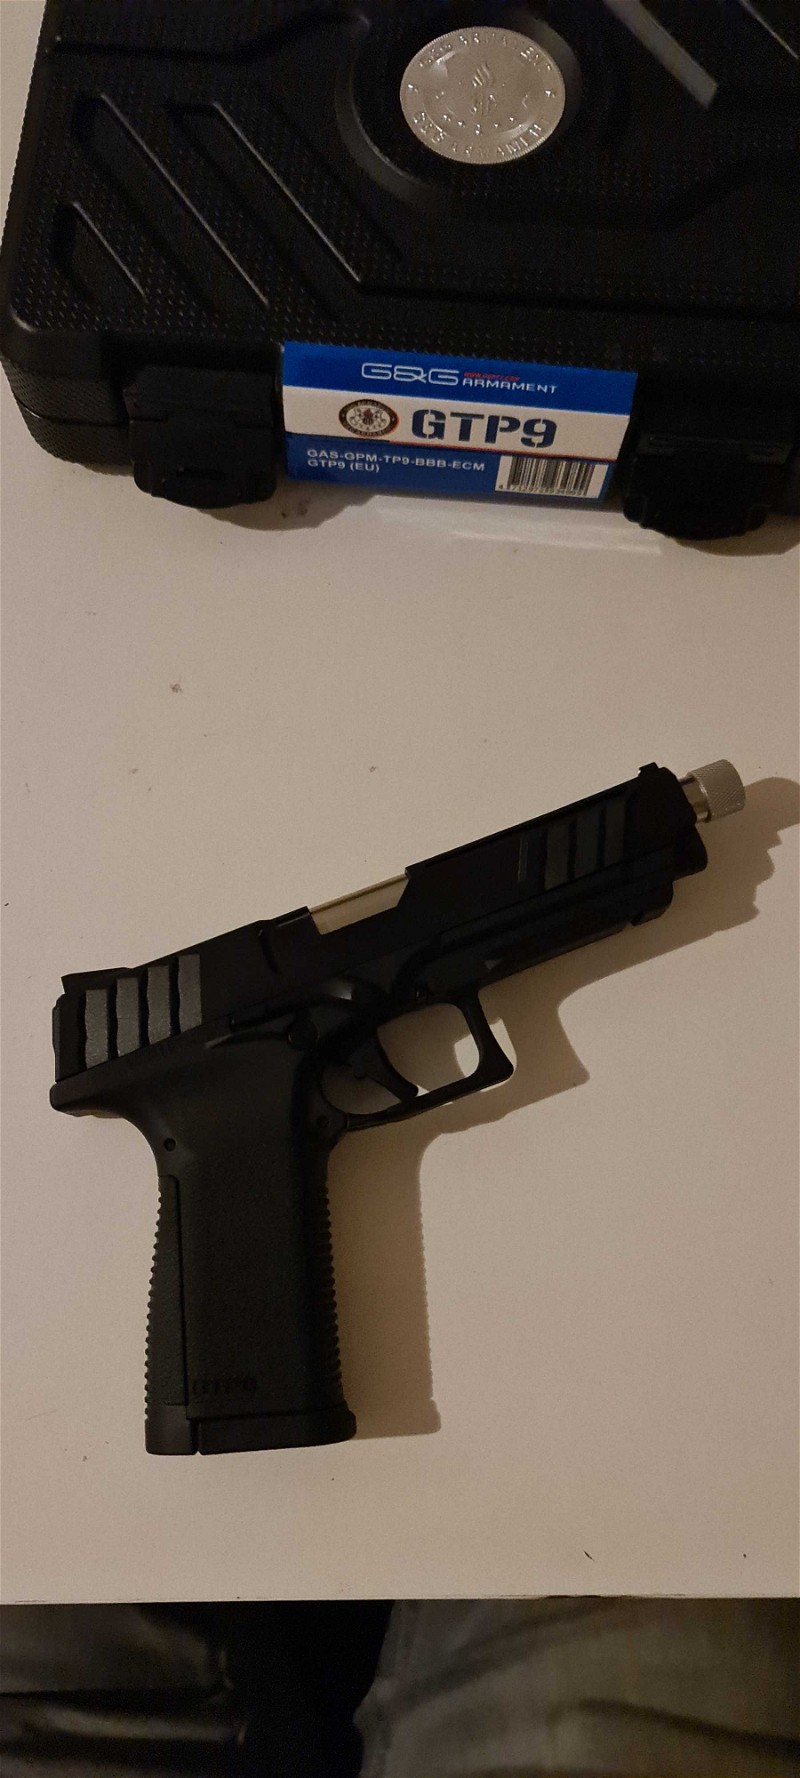 Image 1 pour Gtp9 xtra mag g&g